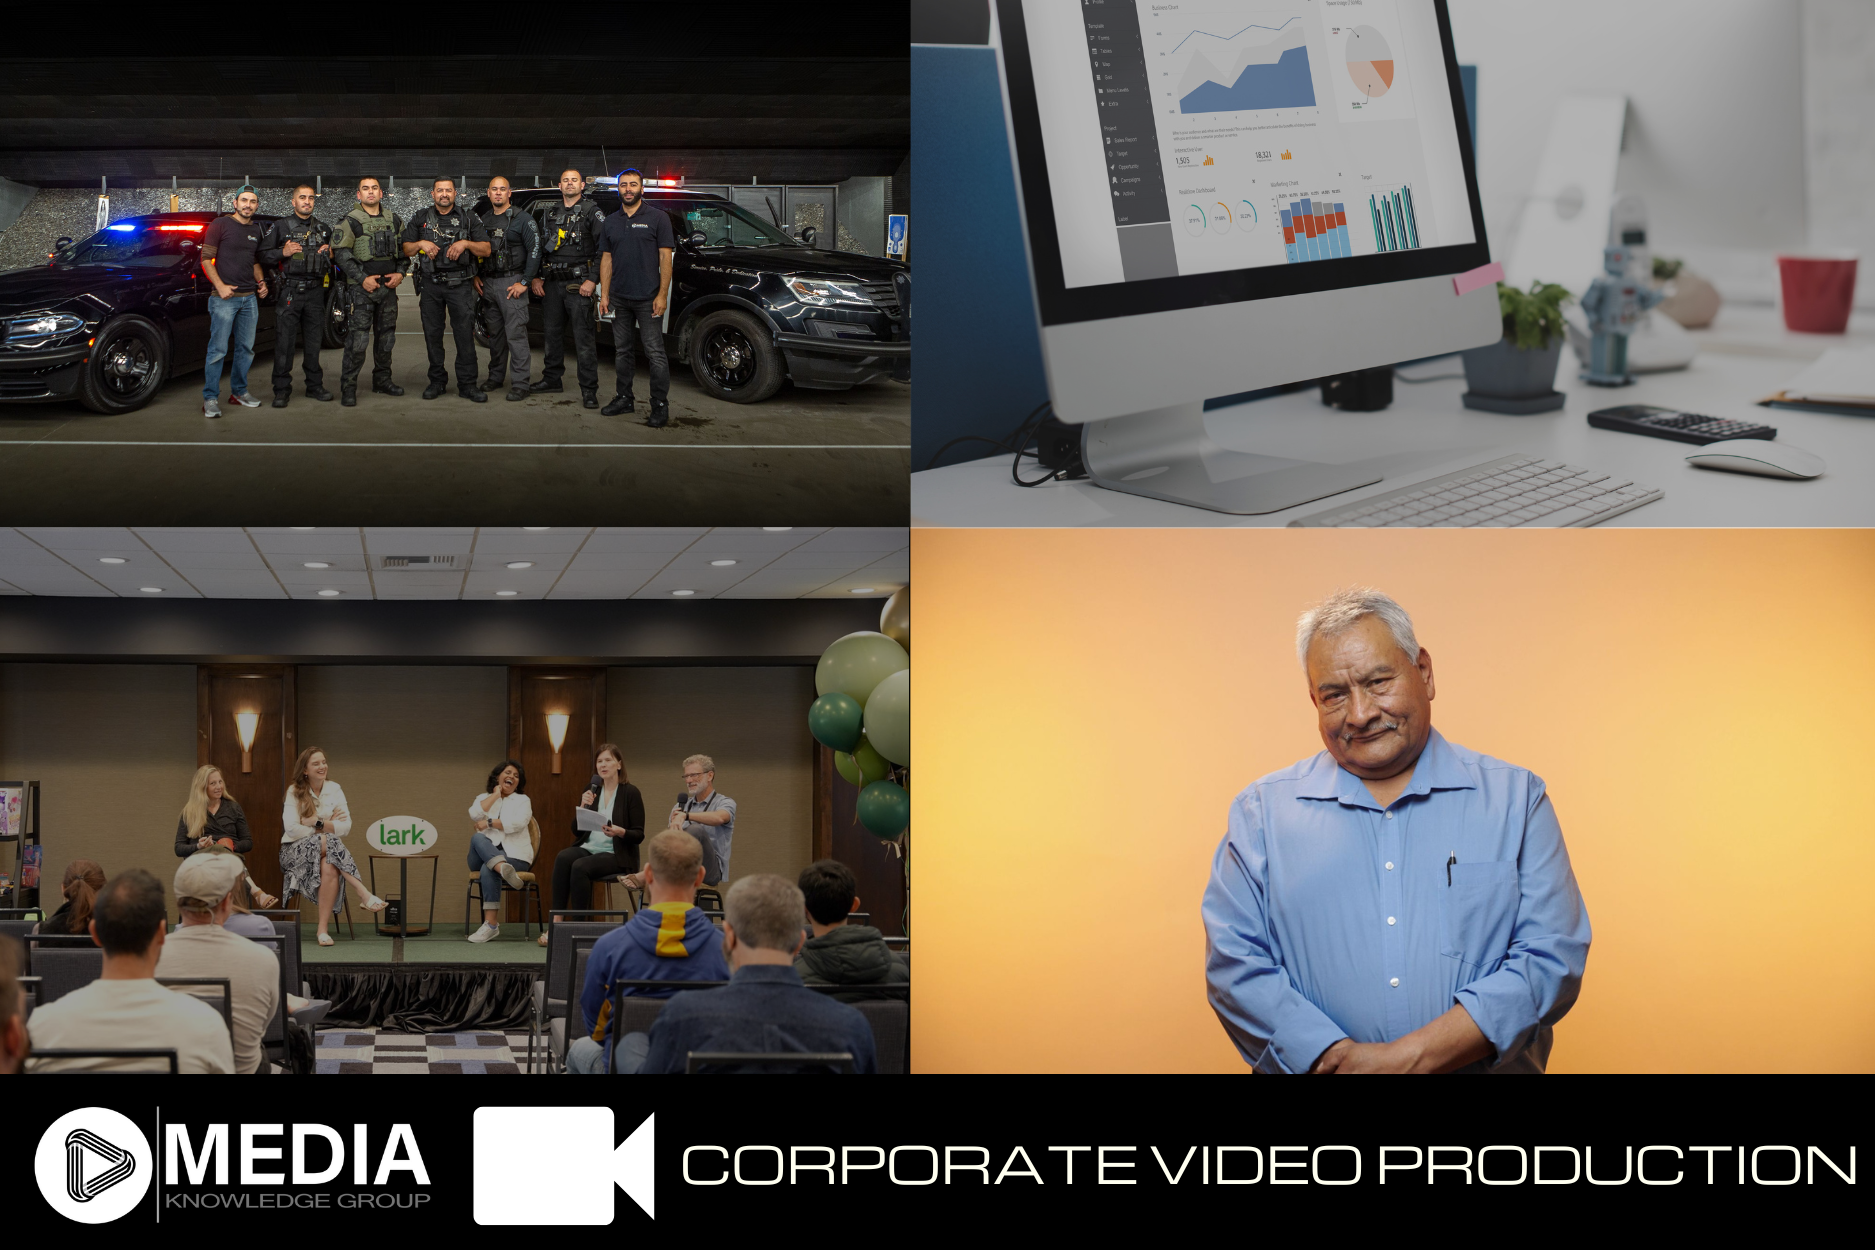 Corporate Video Production Portfolio - Showcasing our expertise through a collection of previous projects.